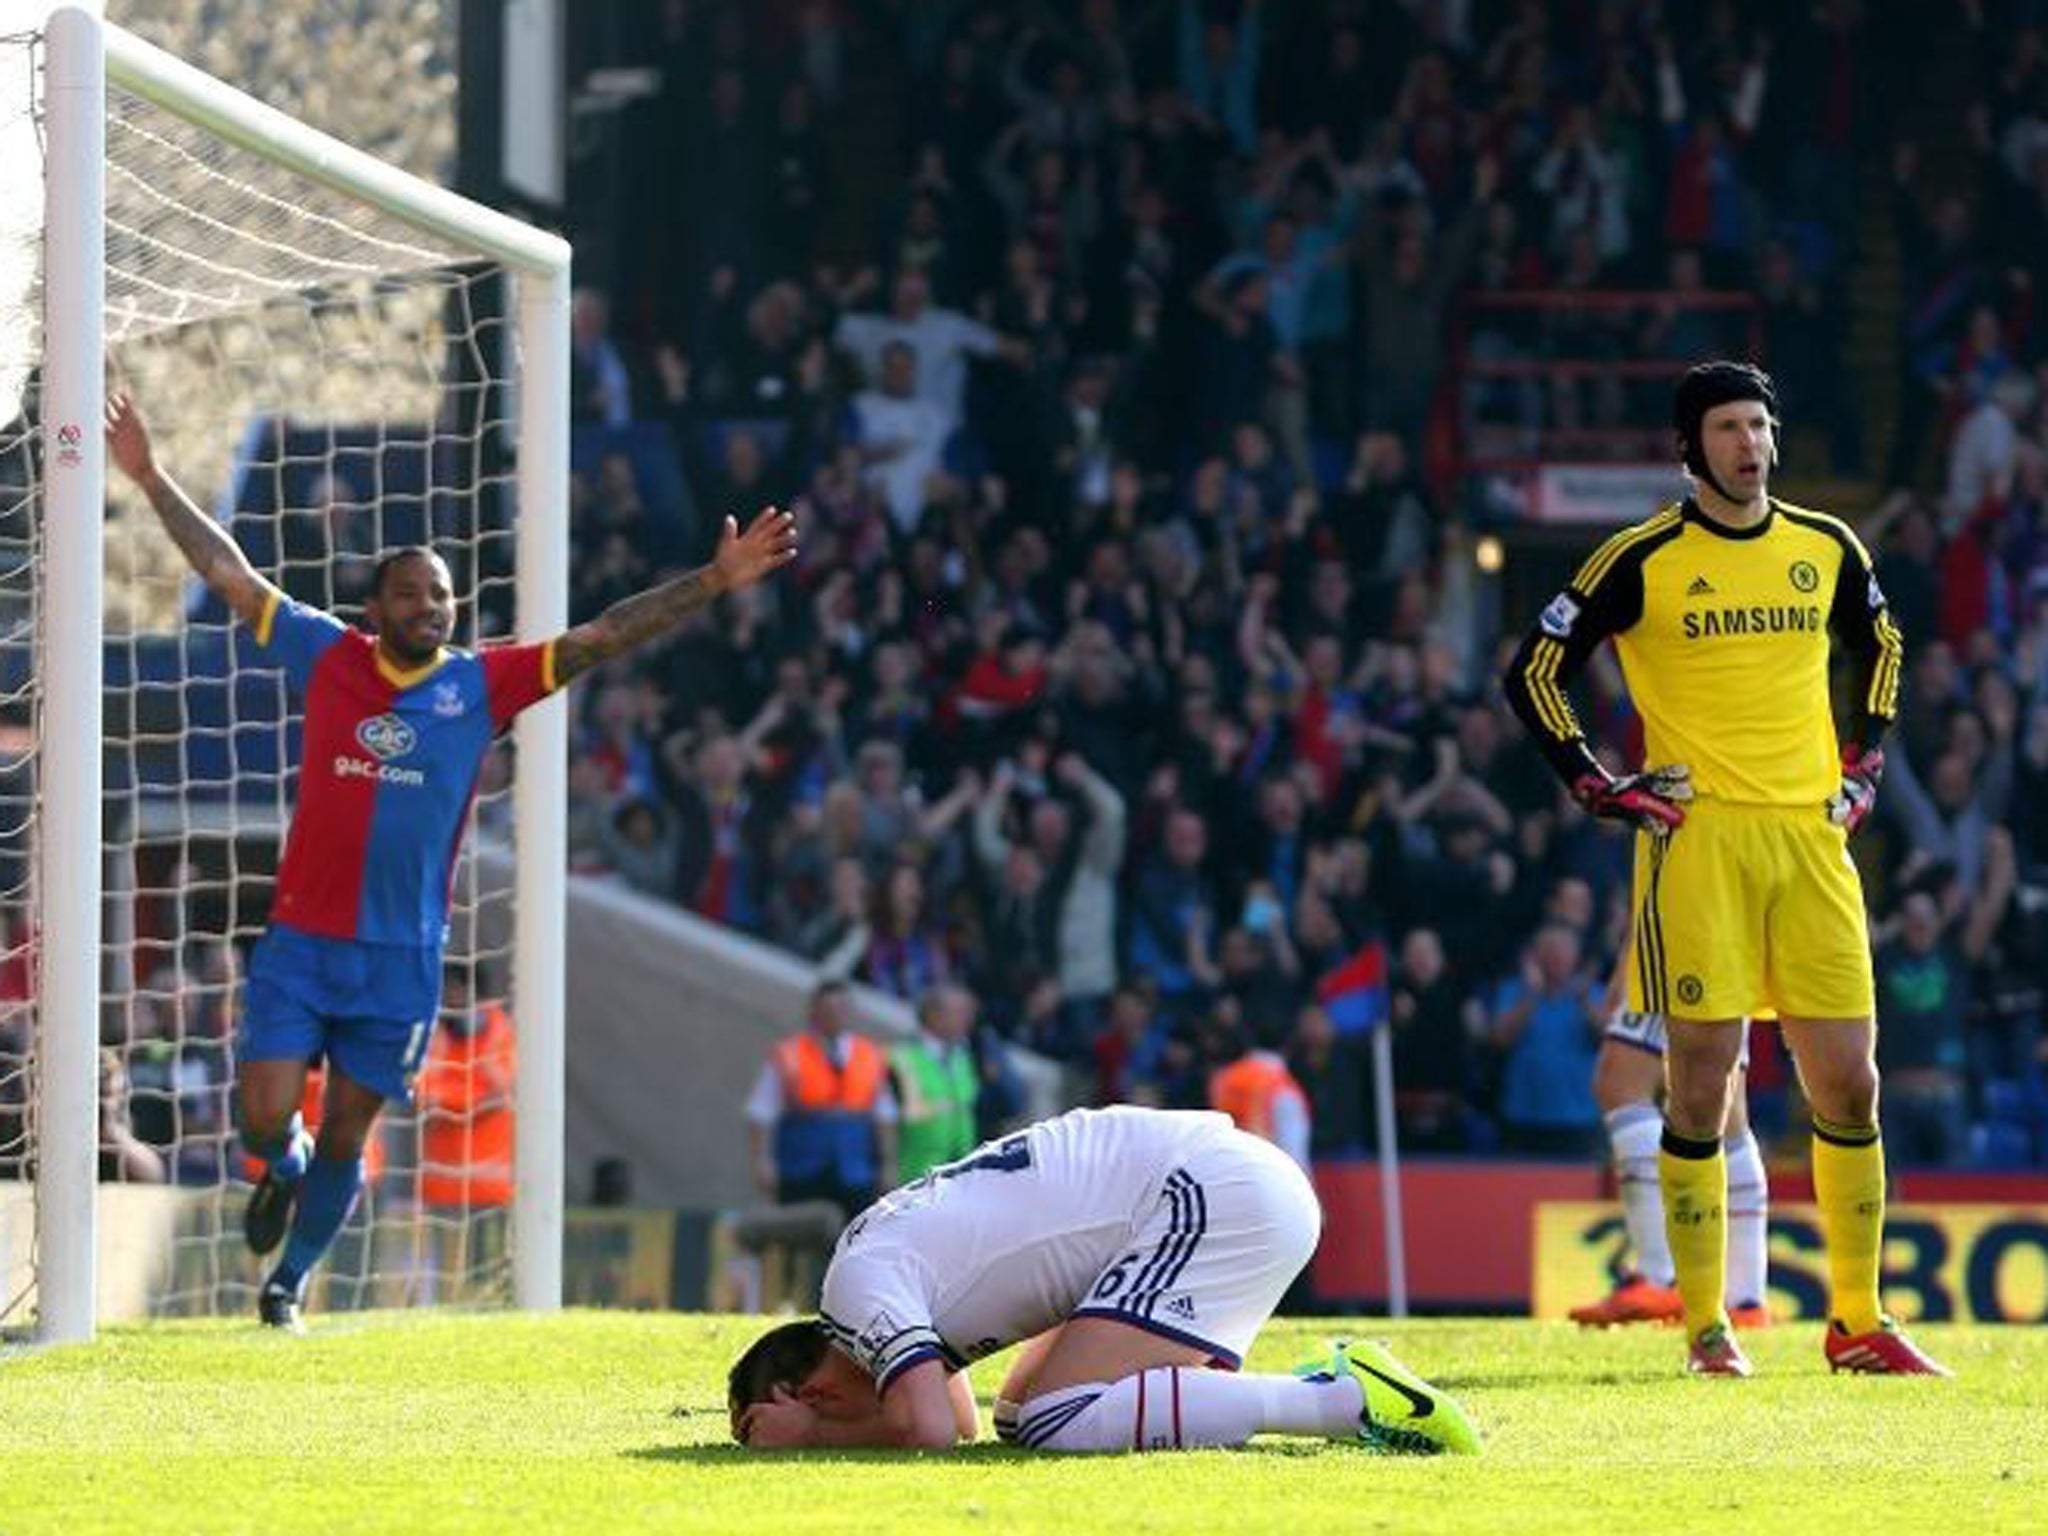 A dejected John Terry reacts after opening the scoring with an own goal